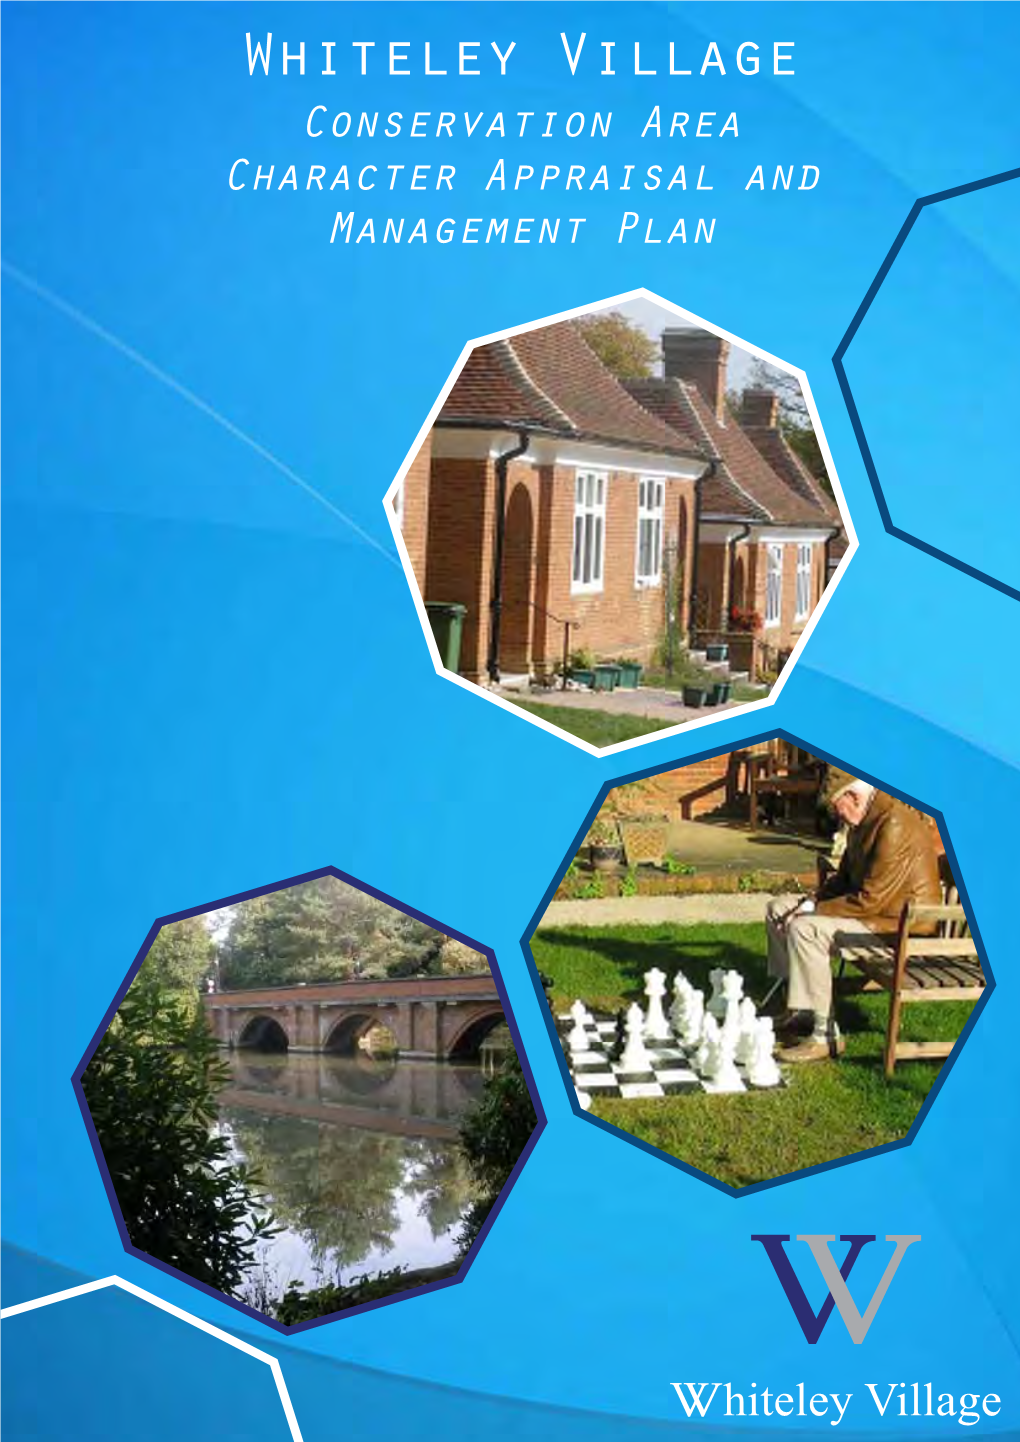 Whiteley Village Conservation Area Character Appraisal and Management Plan